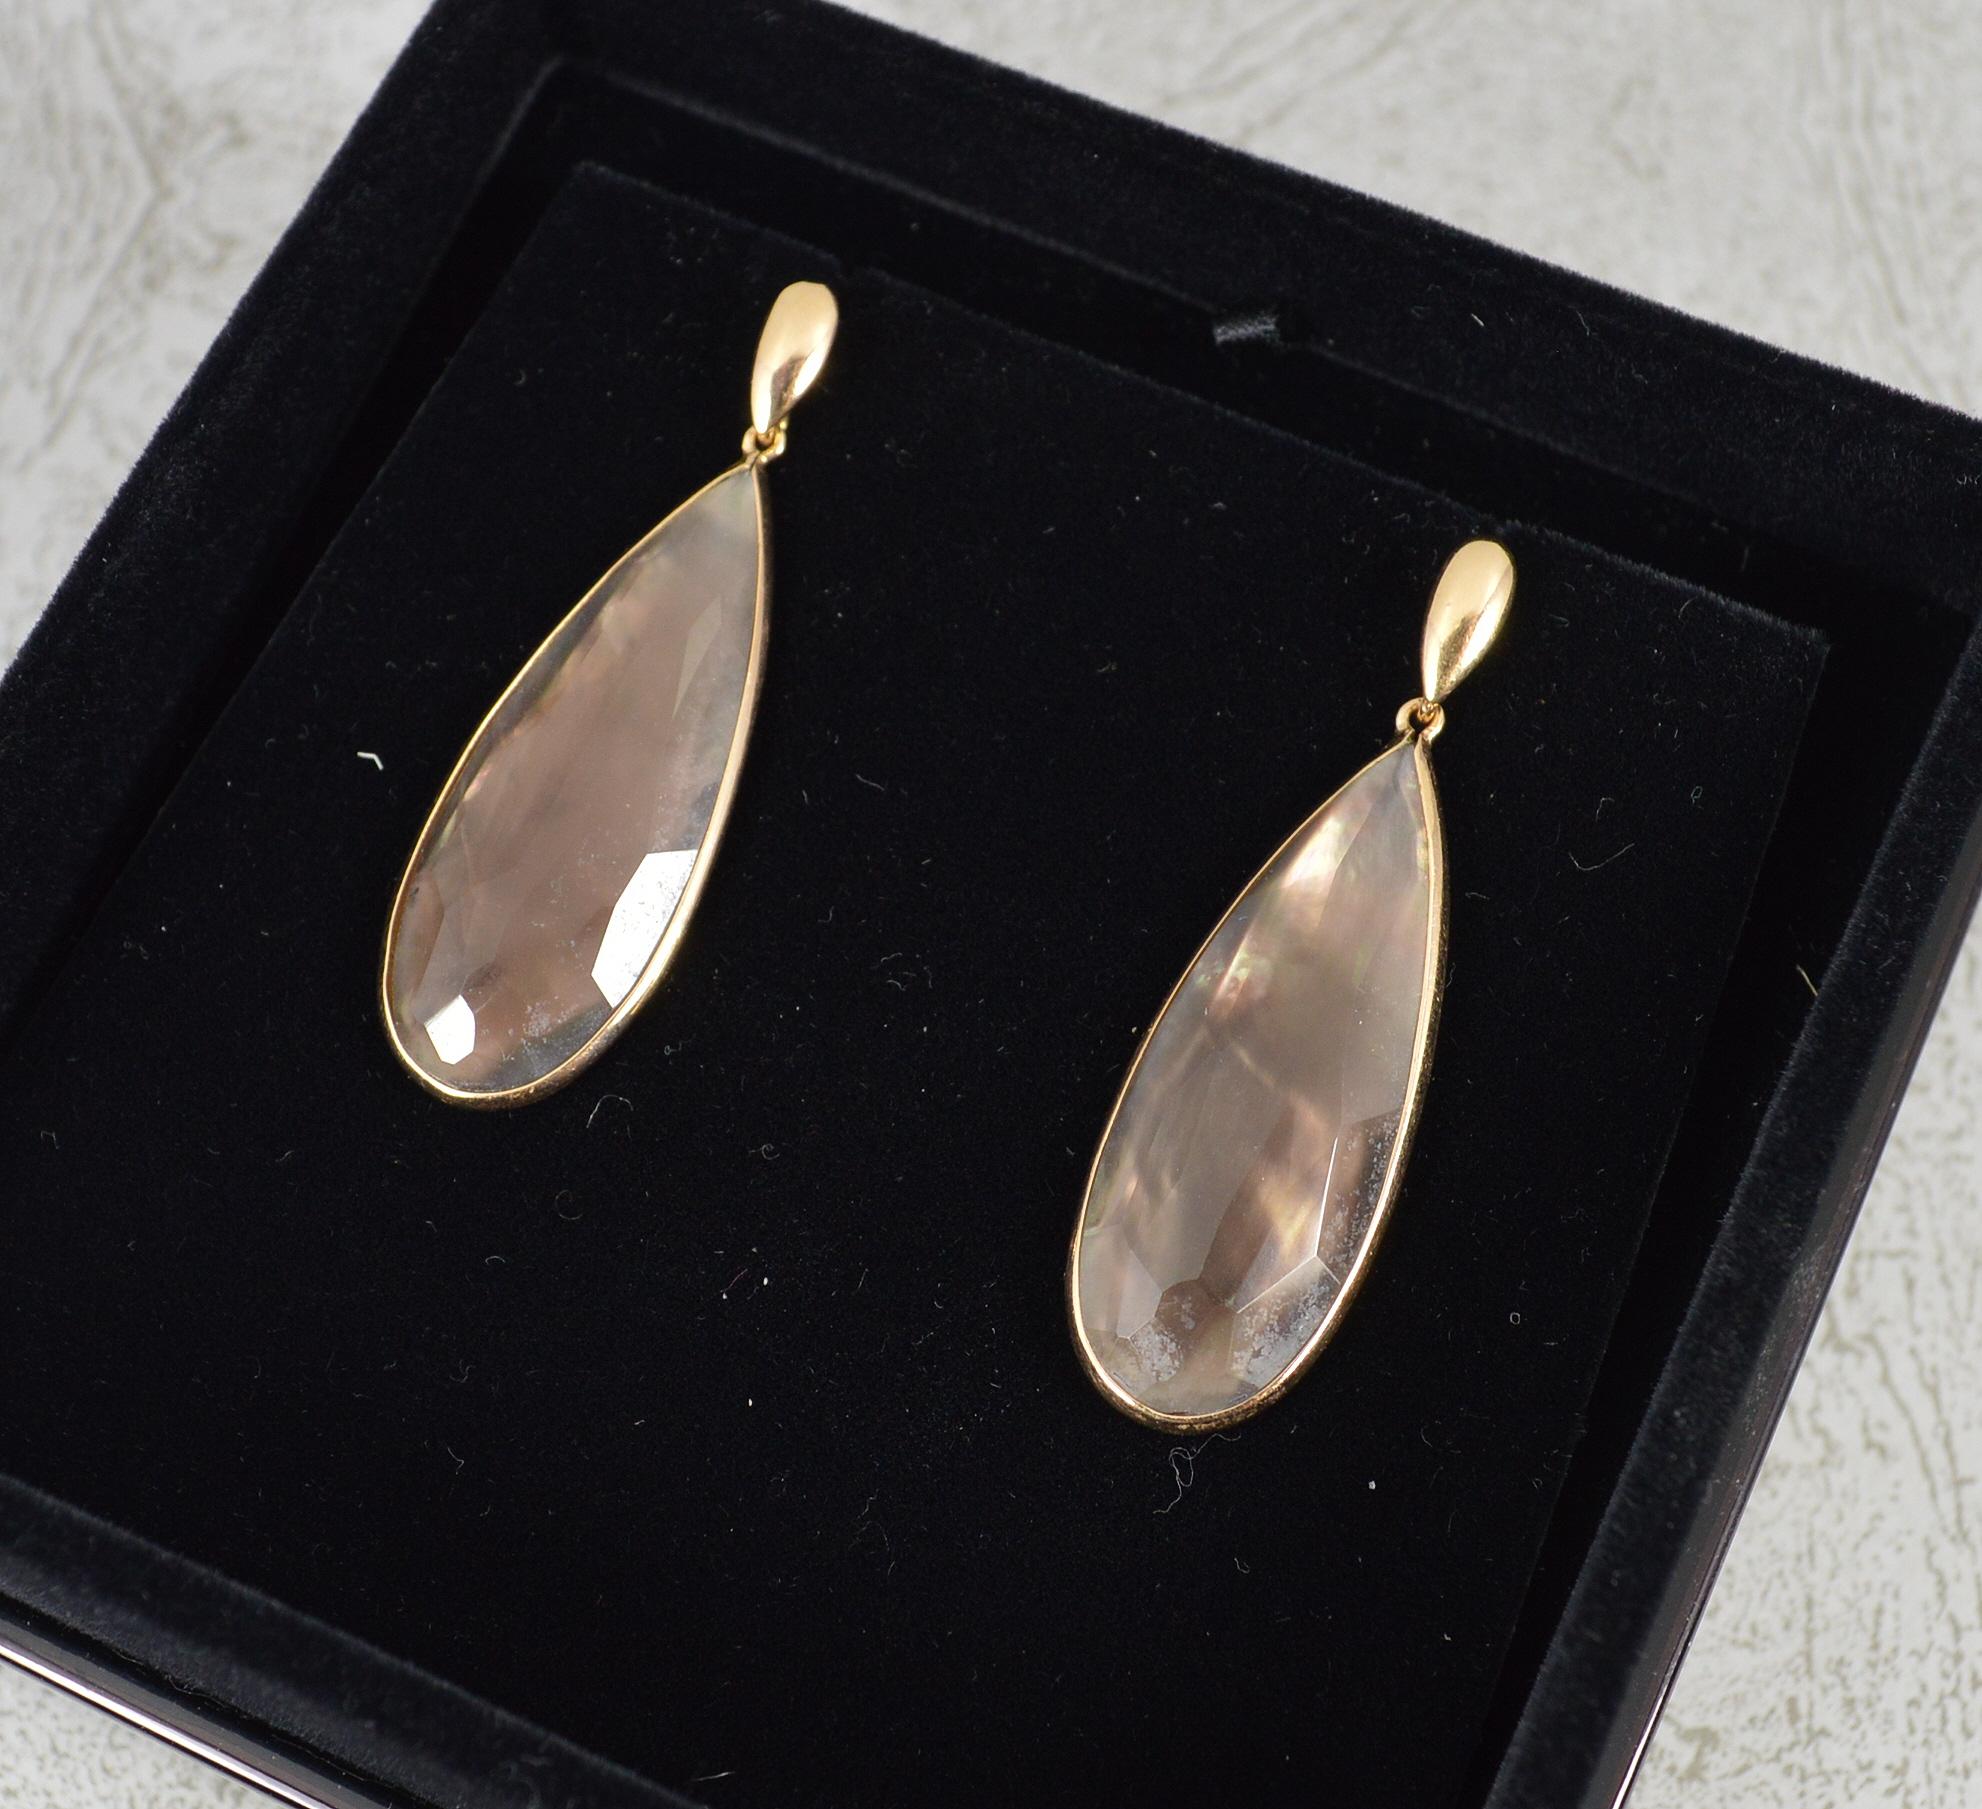 A superb pair of 18ct gold earrings by ANNOUSHKA.
A simple and stylish shape set with a pear drop mother of pearl panel in bezel setting. A facet cut top stone of wonderful grey oily colour.
Solid 18ct rose gold.
14mm x 36mm clusters